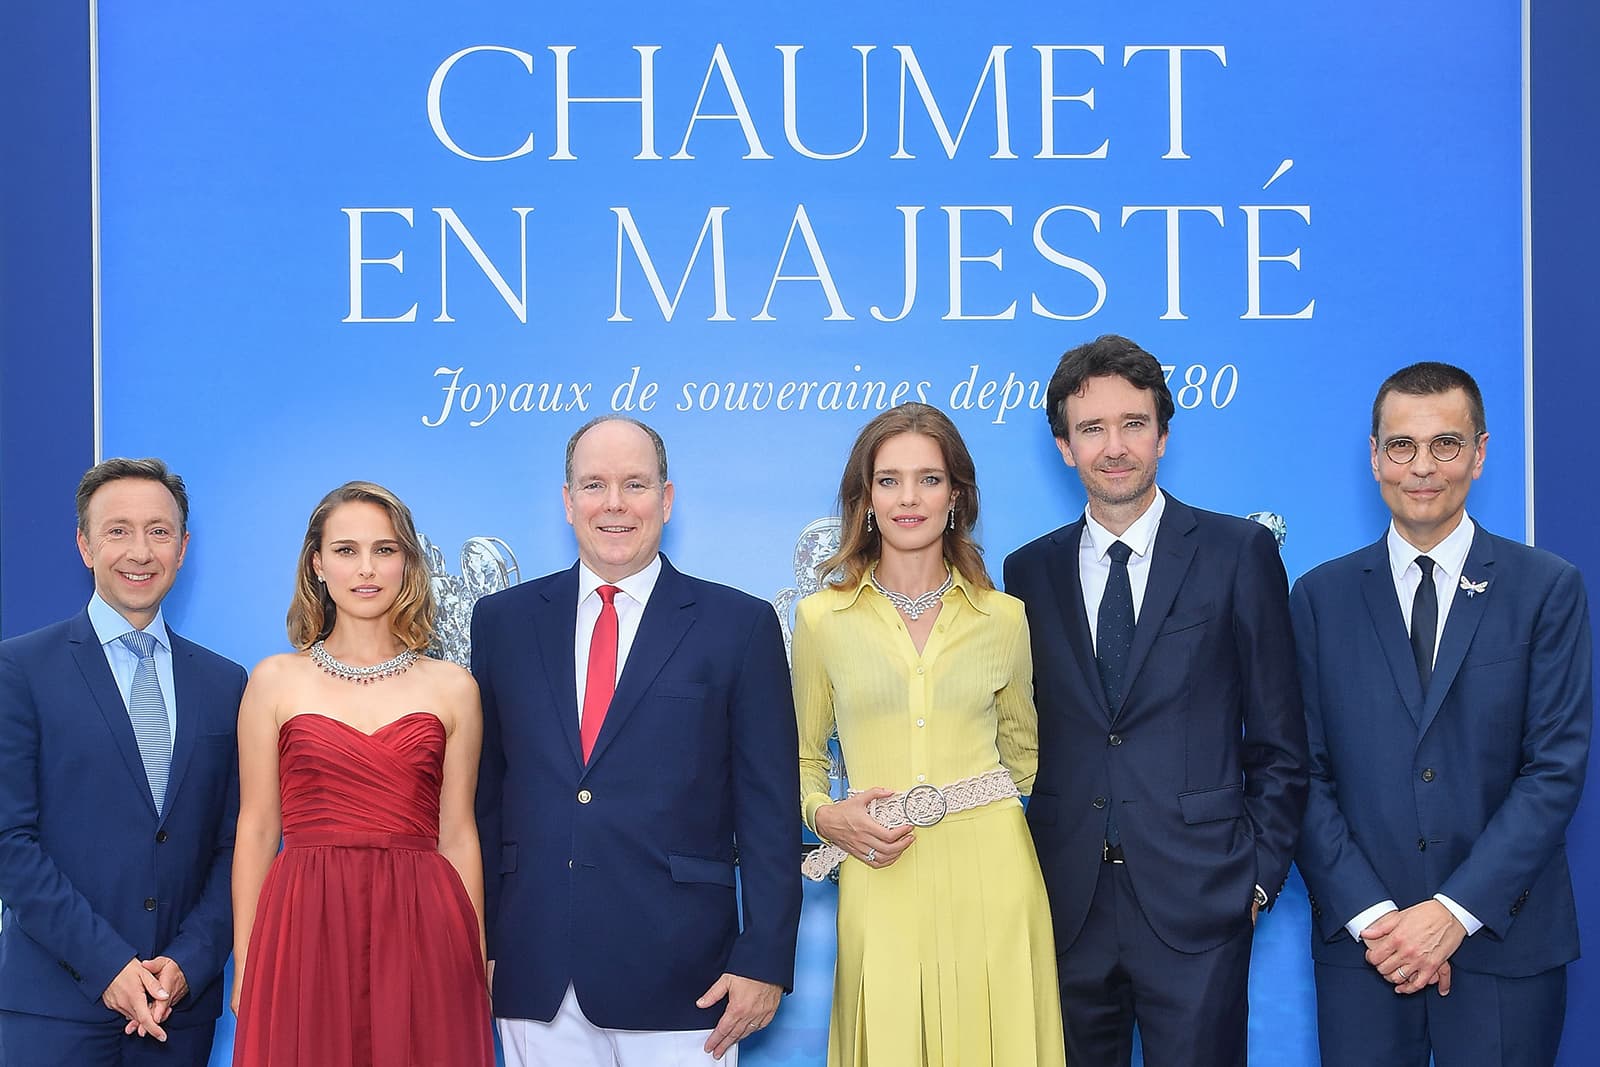 Stéphane Bern, Natalie Portman, HSH Prince Albert II, Natalia Vodianova and Jean-Marc Mansvelt at the opening of Chaumet in Majesty: Jewels of Sovereigns Since 1780 exhibition 